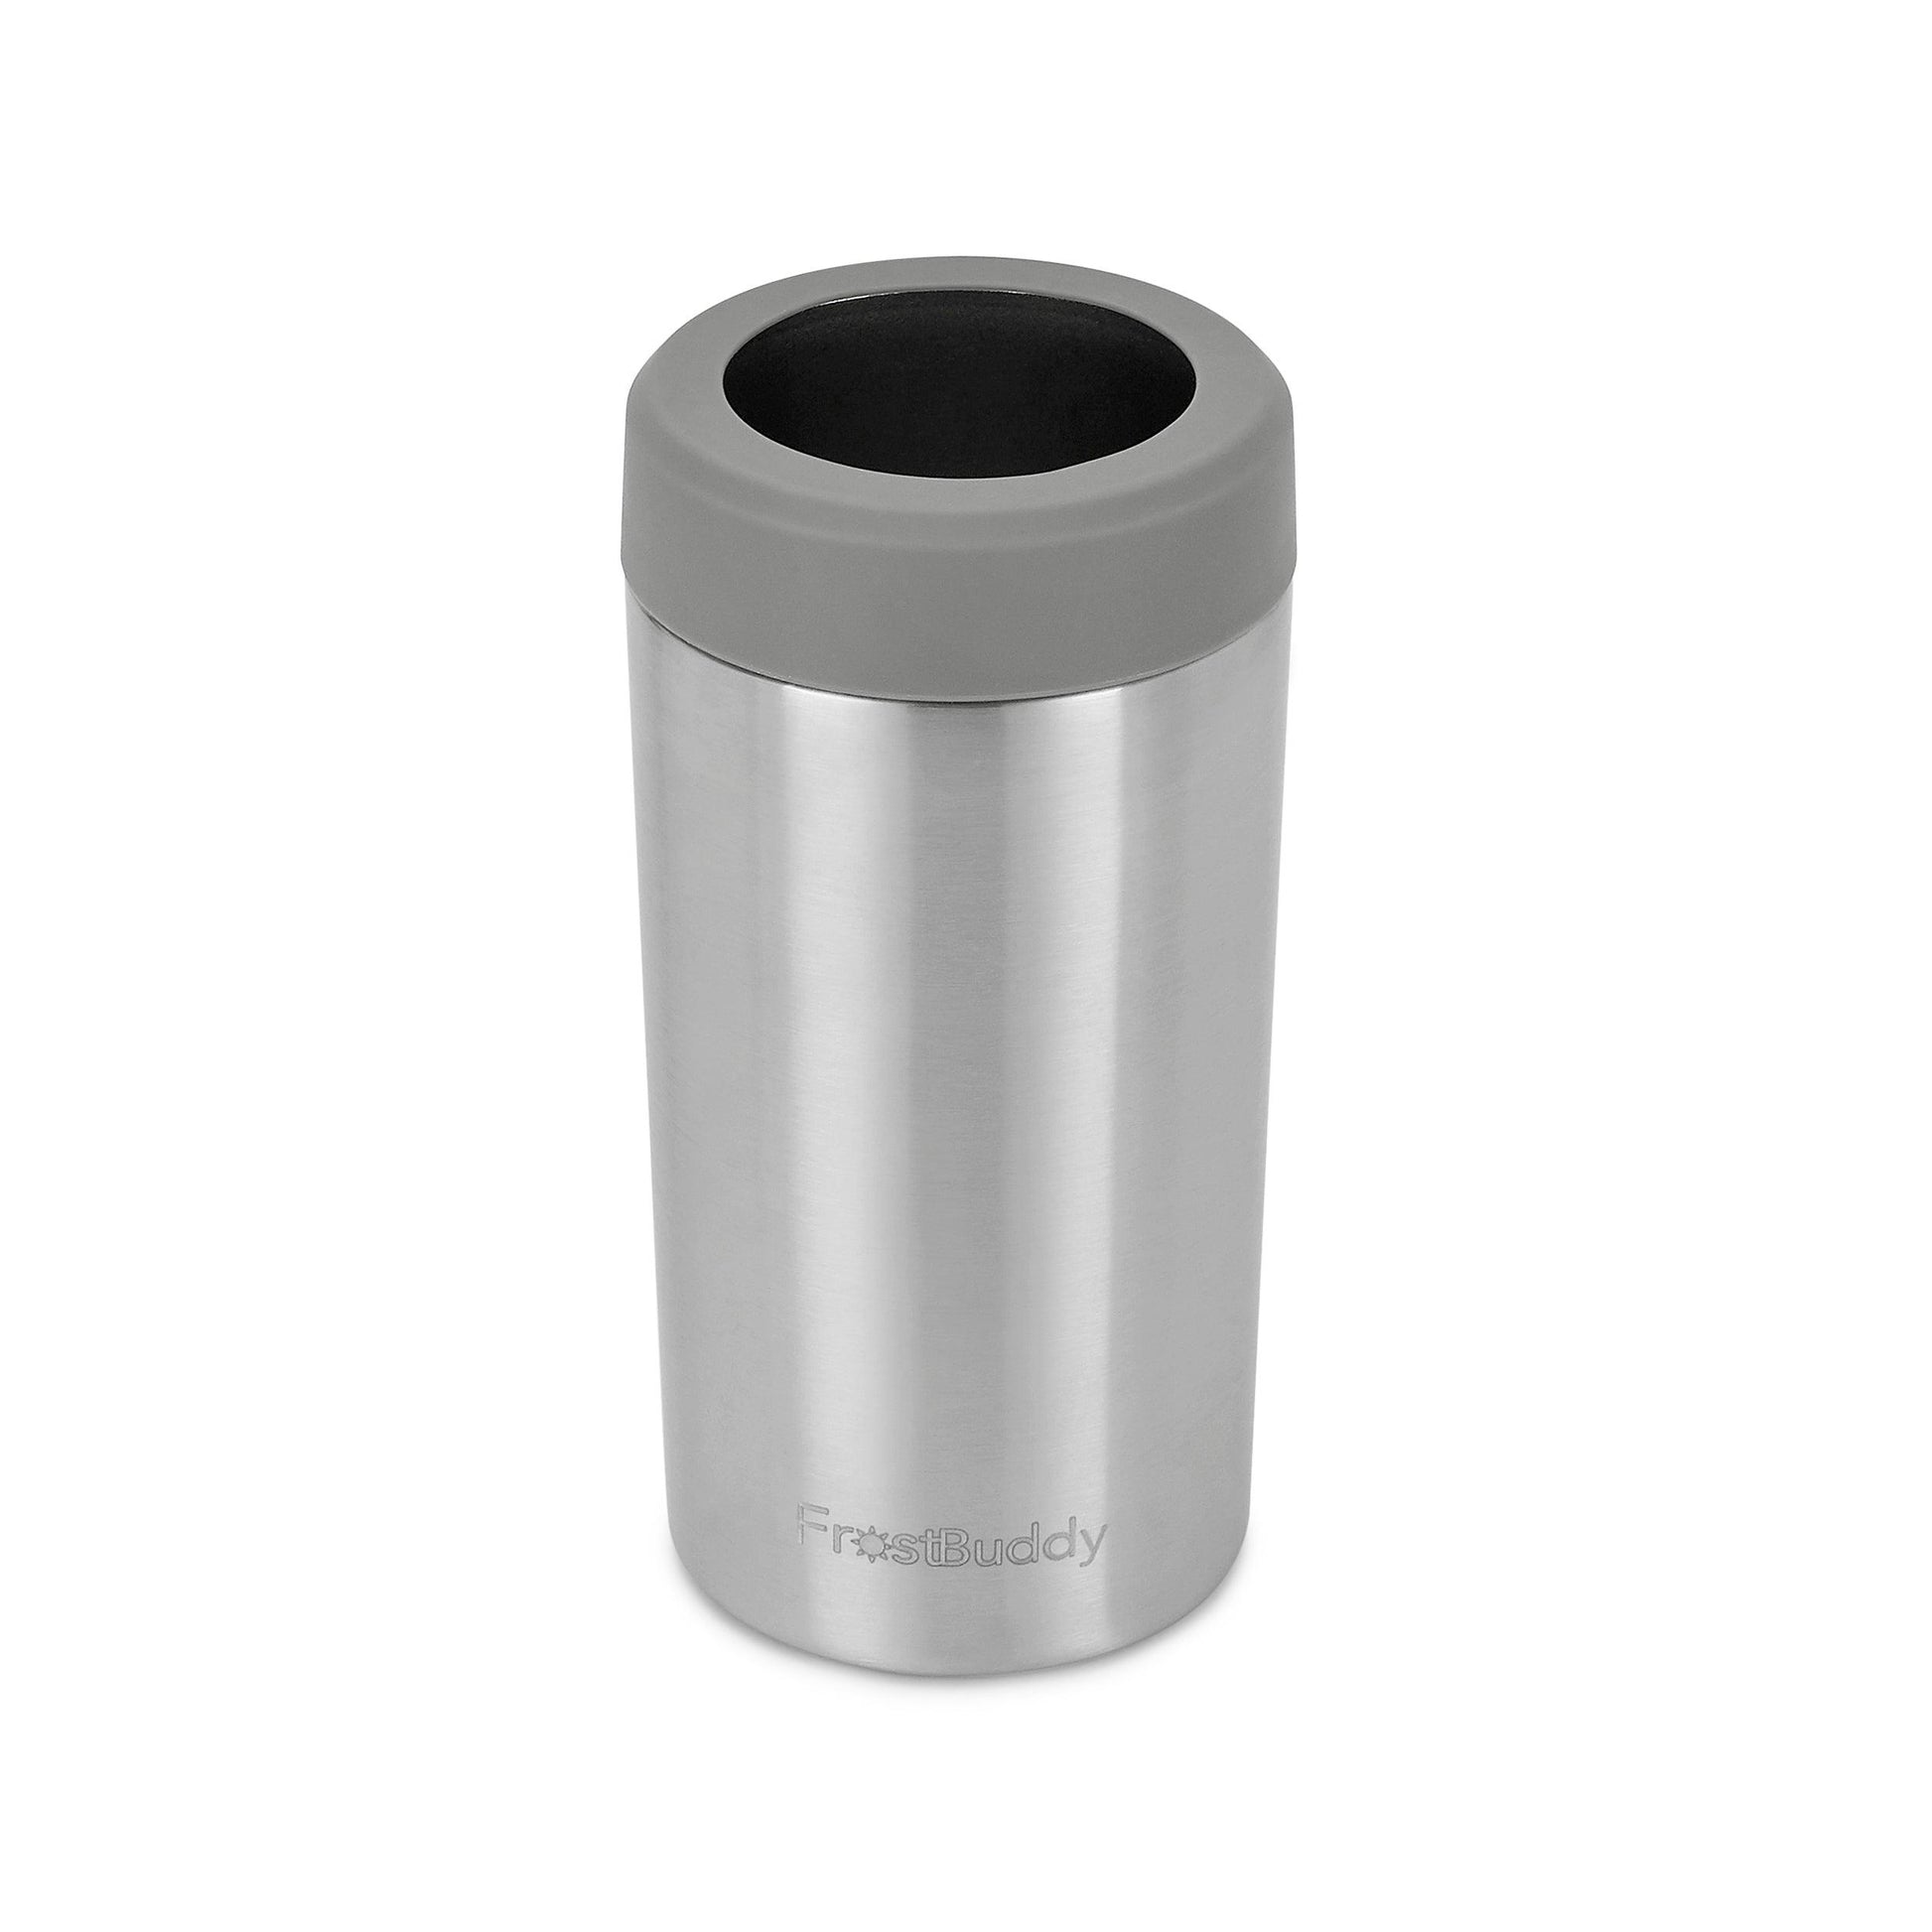 Frost Buddy​ Universal 2.0 Stainless Steel Insulated Can Cooler